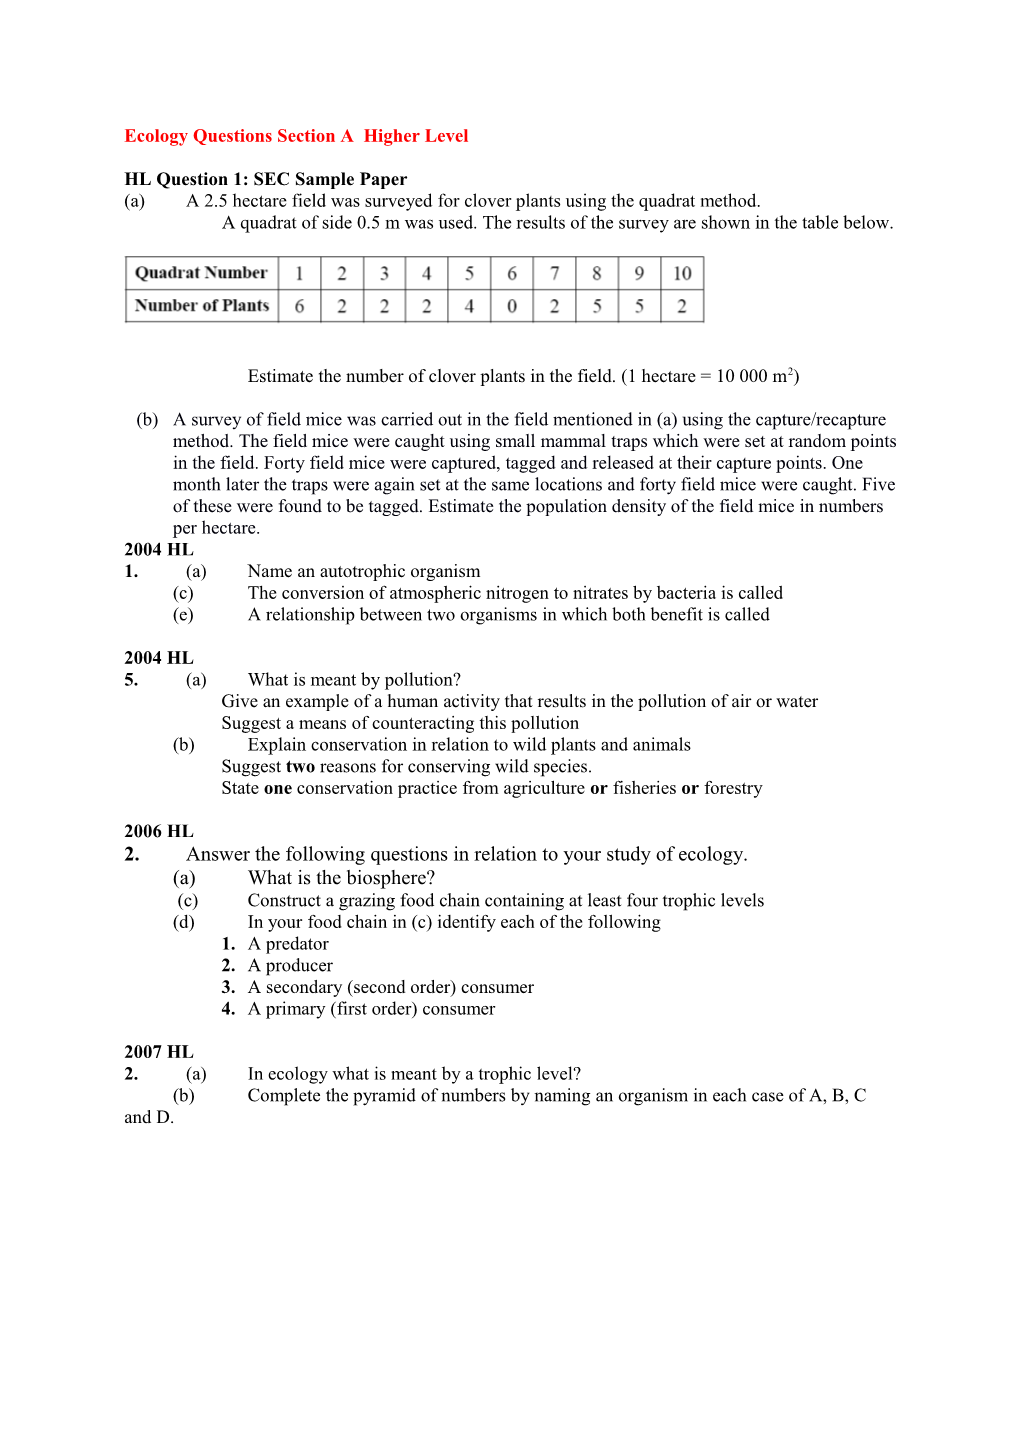 Ecology Questions Section a Higher Level